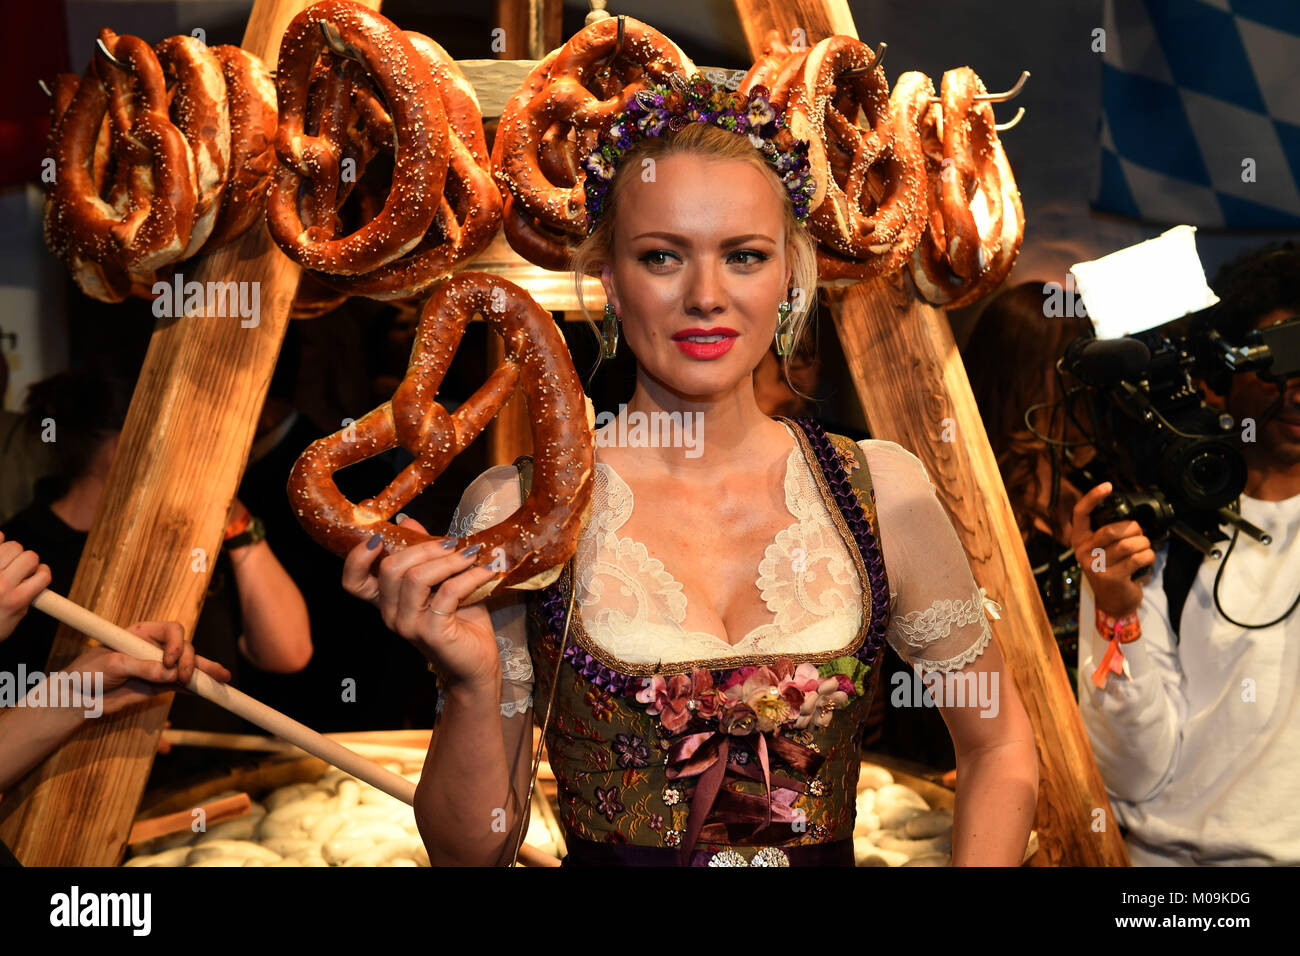 Going, Germany. 19th Jan, 2018. Model Franziska Knuppe attends the 27th traditional 'Weißwurst party' (lit. Bavarian white sausage party) at the Stanglwirt Inn in Going, Germany, 19 January 2018. The 'Weißwurst party' is an event where stars and celebrities meet a day before the legendary Hahnenkamm downhill race. Credit: Felix Hörhager/dpa/Alamy Live News Stock Photo